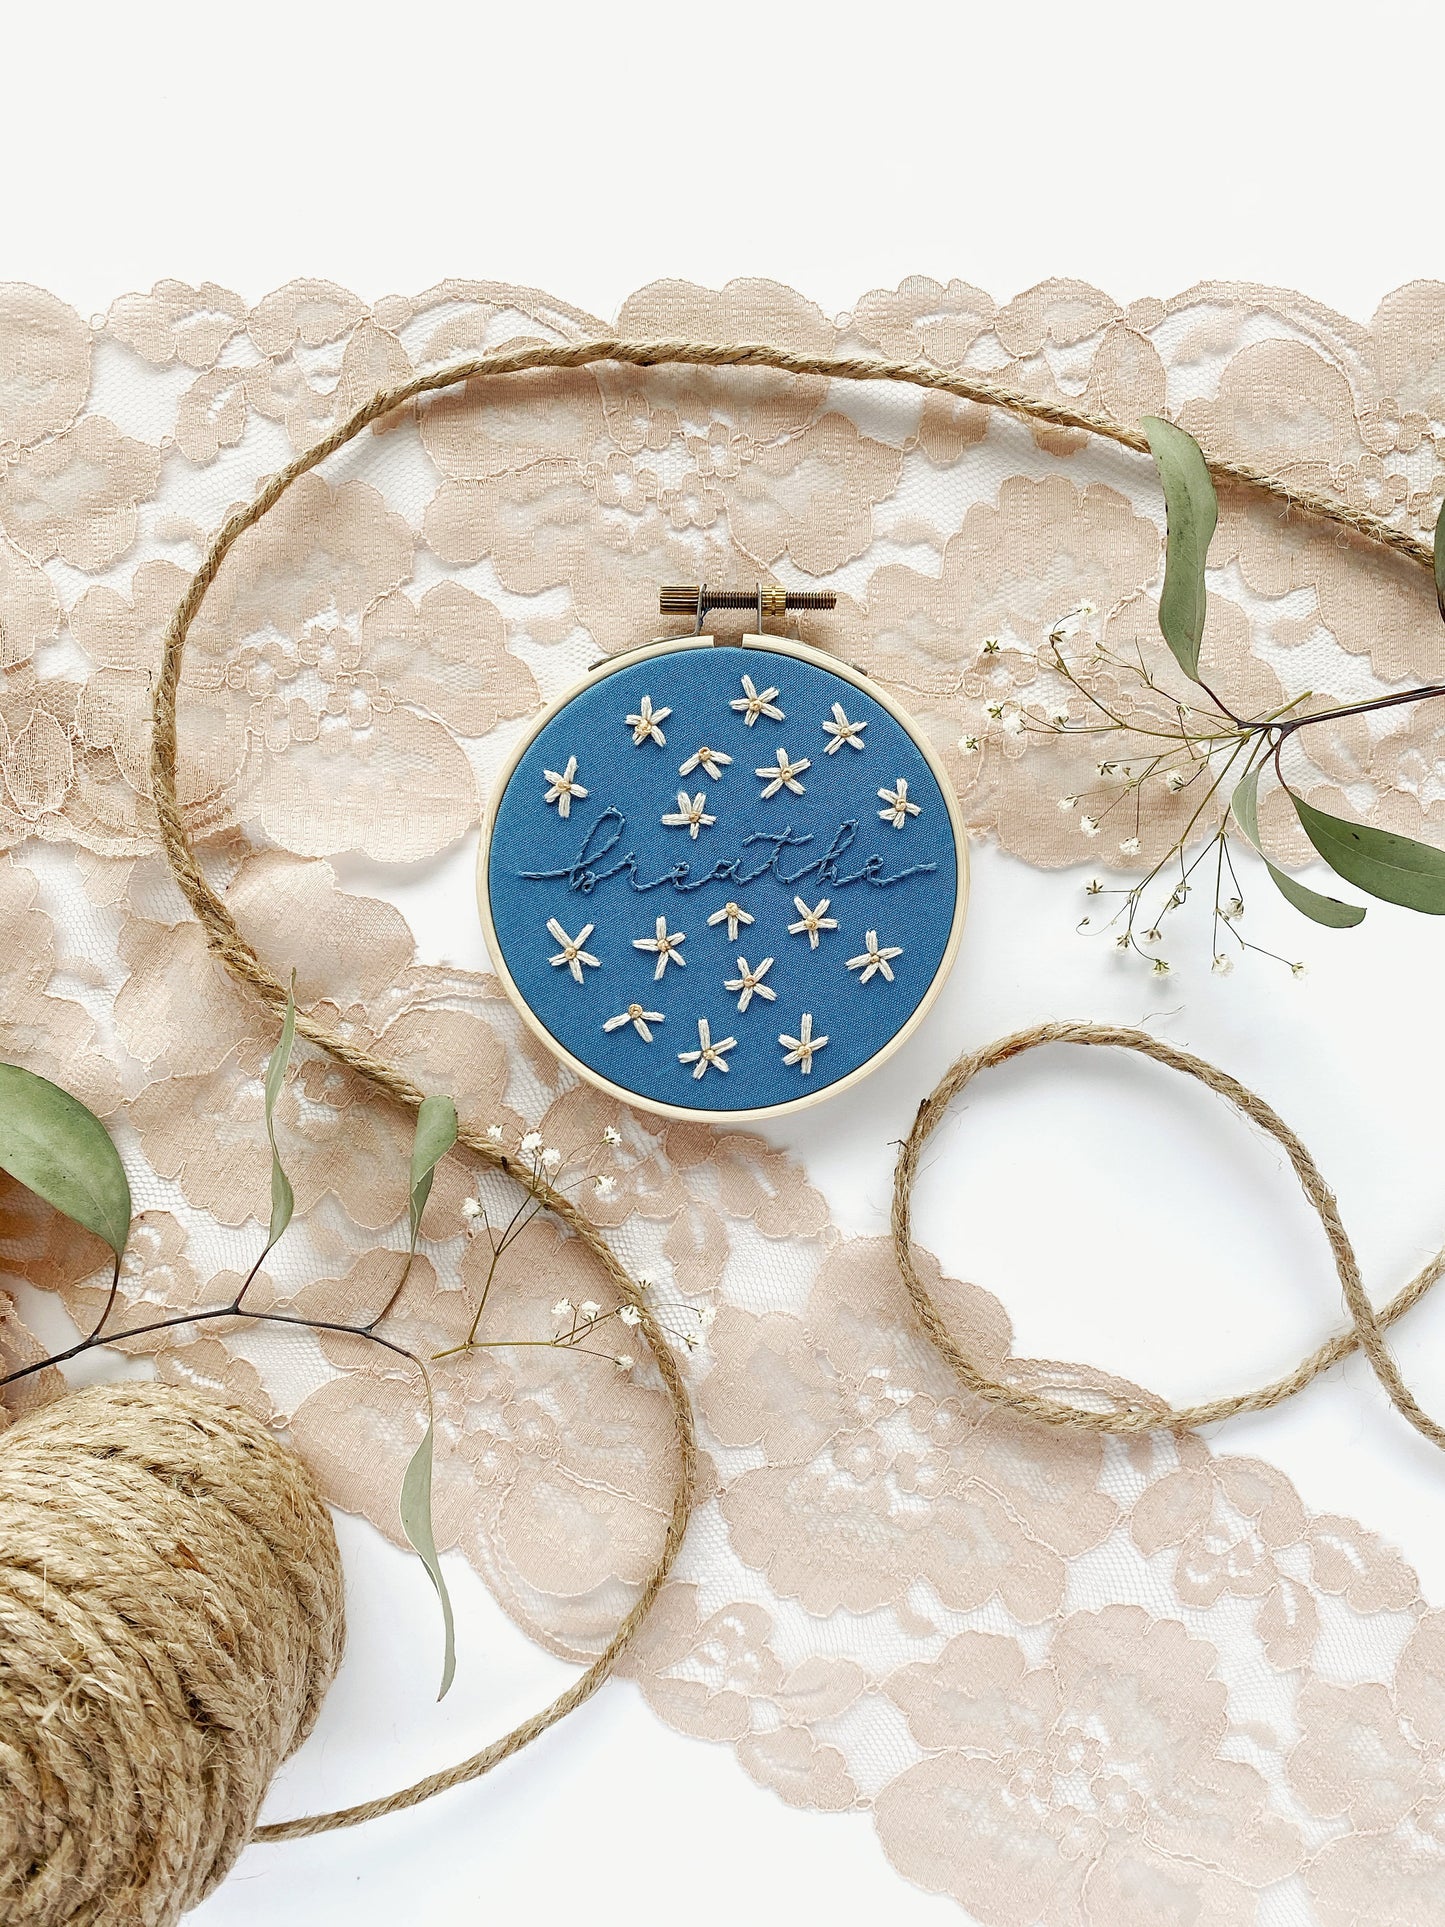 Breathe | 4” | Happy Daisy Floral Embroidery Hoop Art for Home Decor with Subtle Calligraphy Lettering Ocean Blue